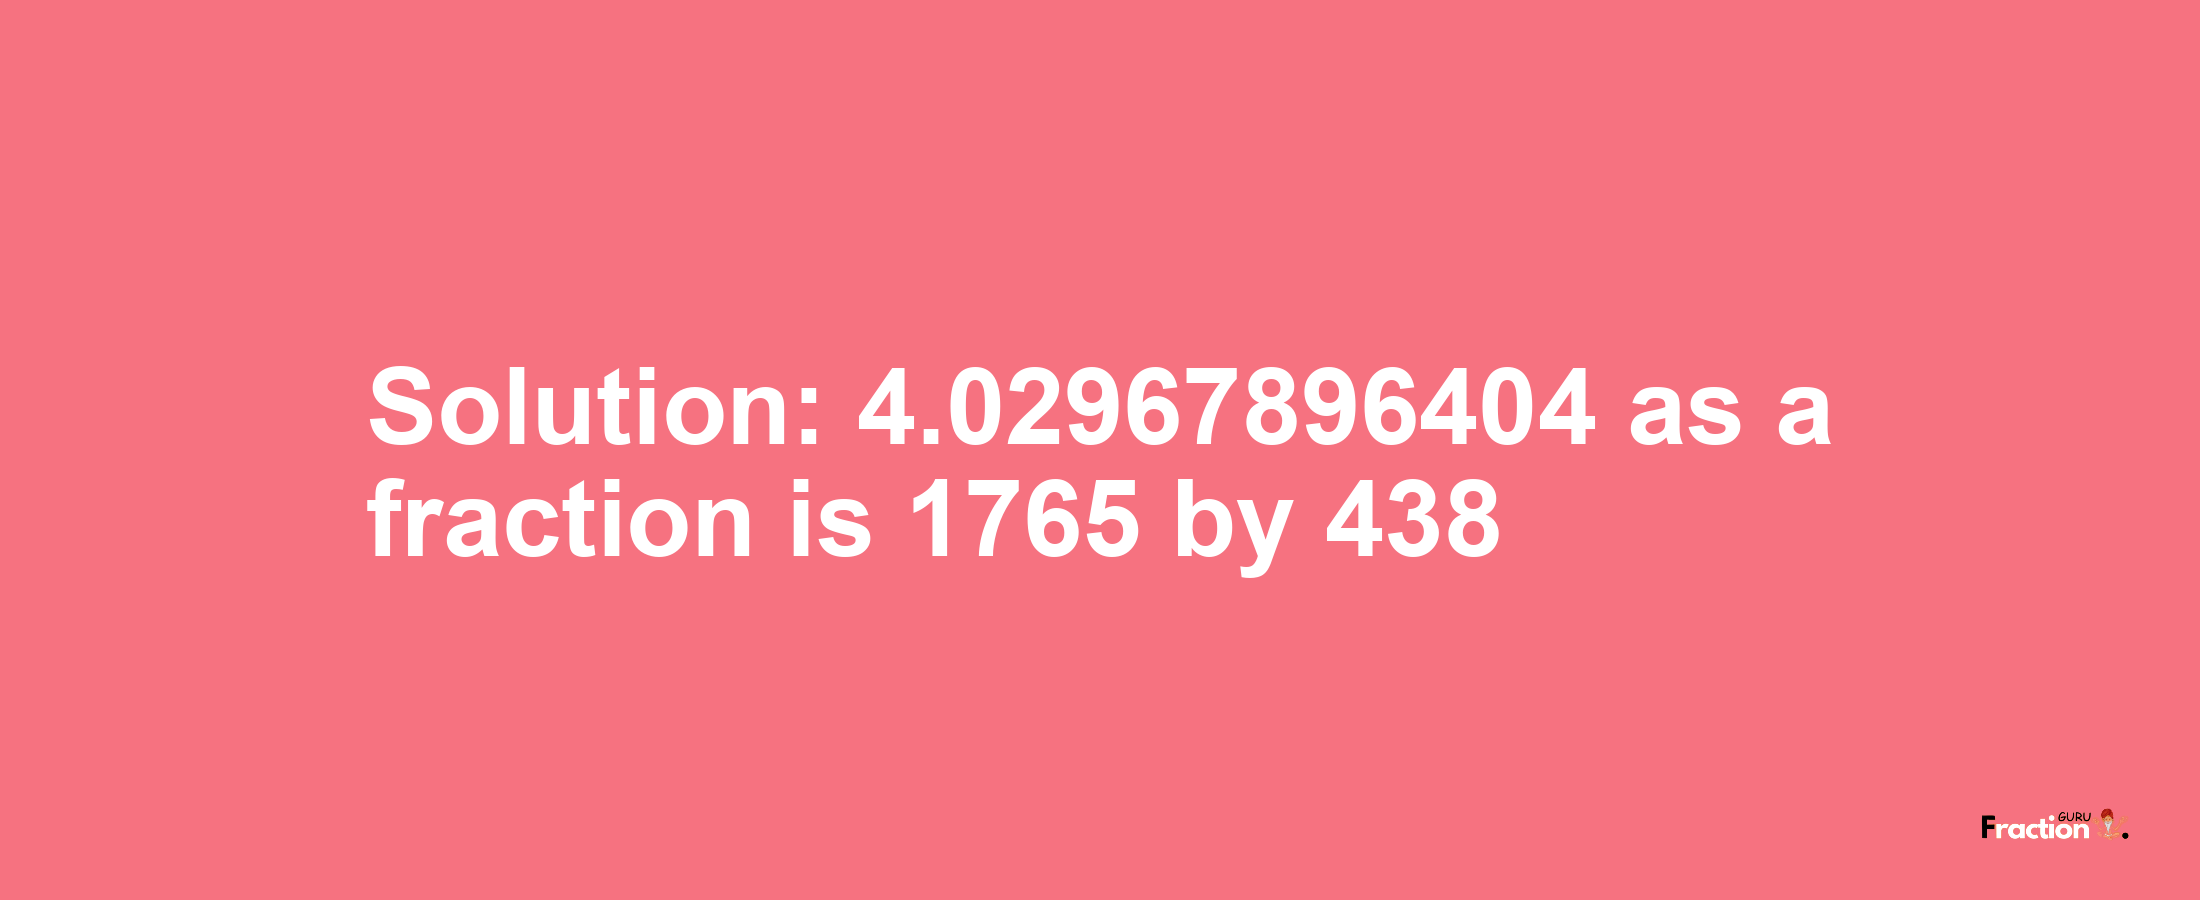 Solution:4.02967896404 as a fraction is 1765/438